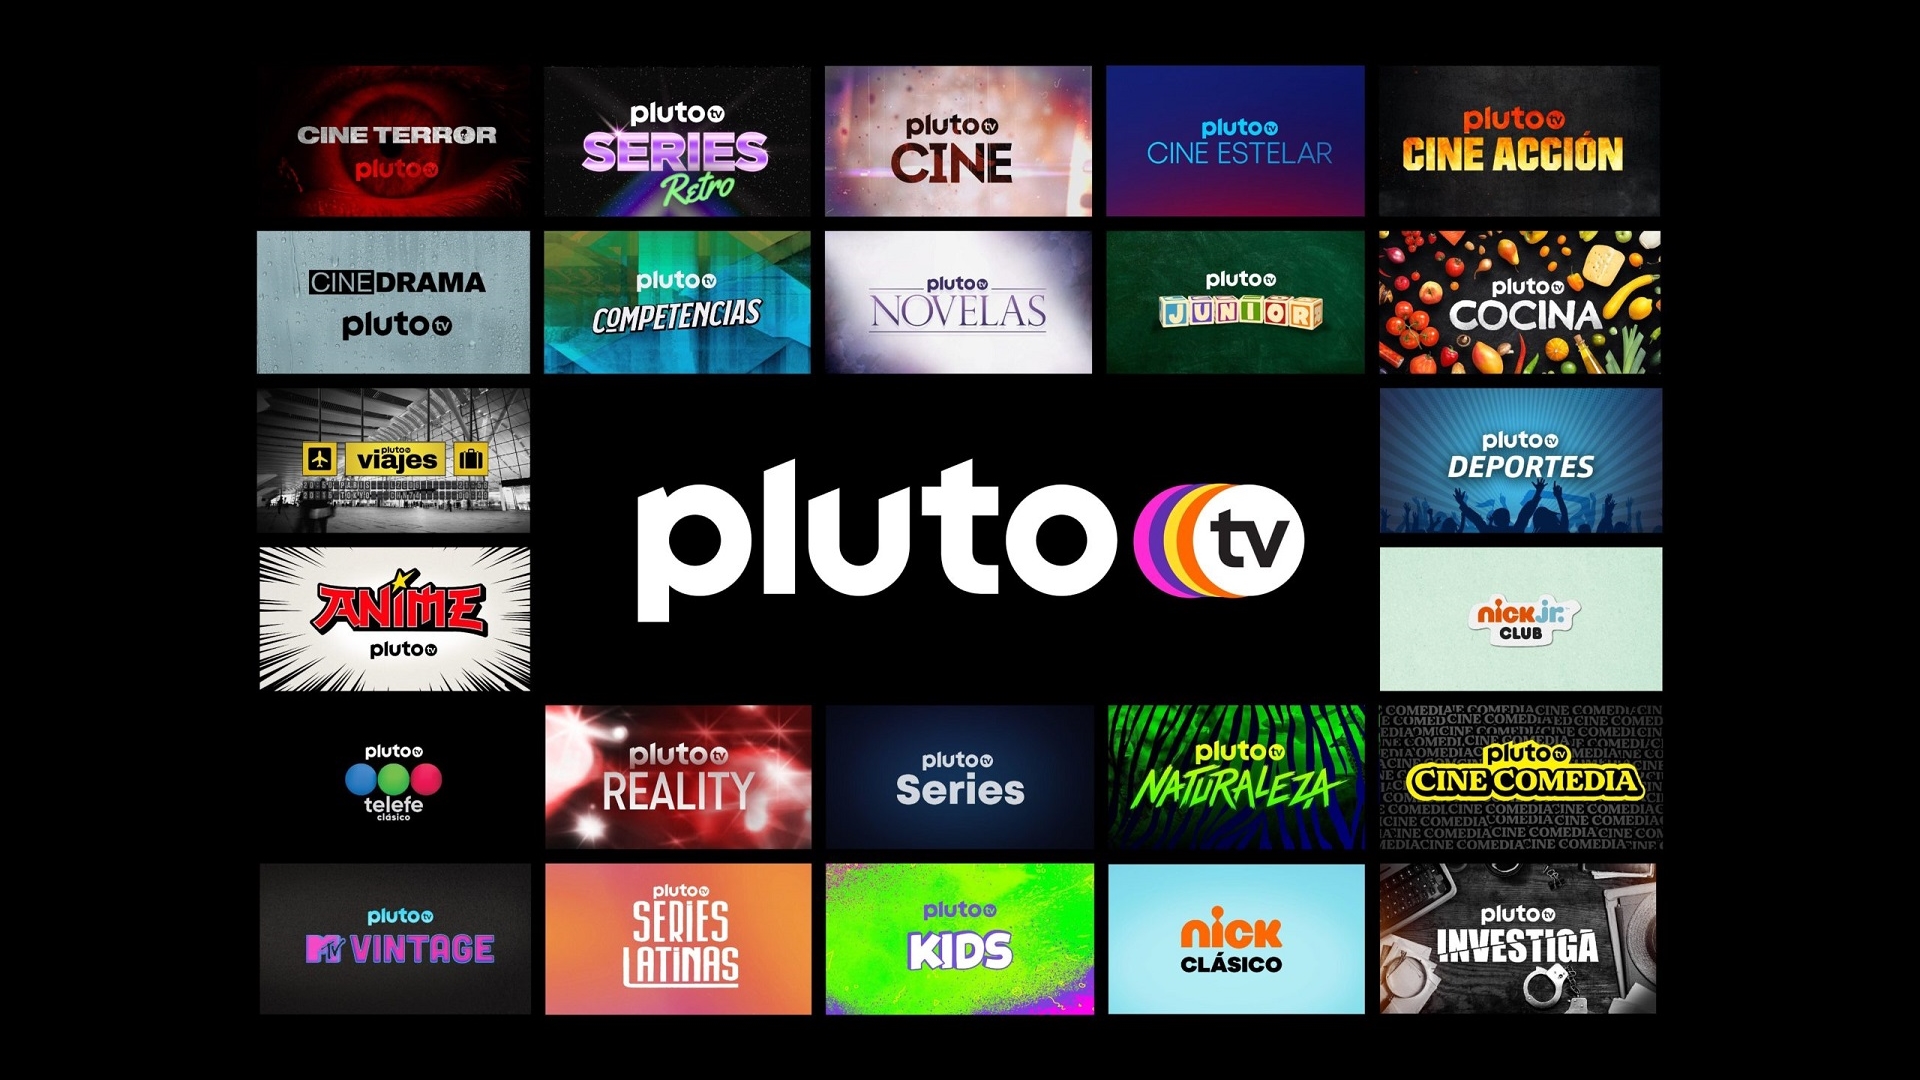 pluto-tv-what-it-is-and-how-to-watch-it